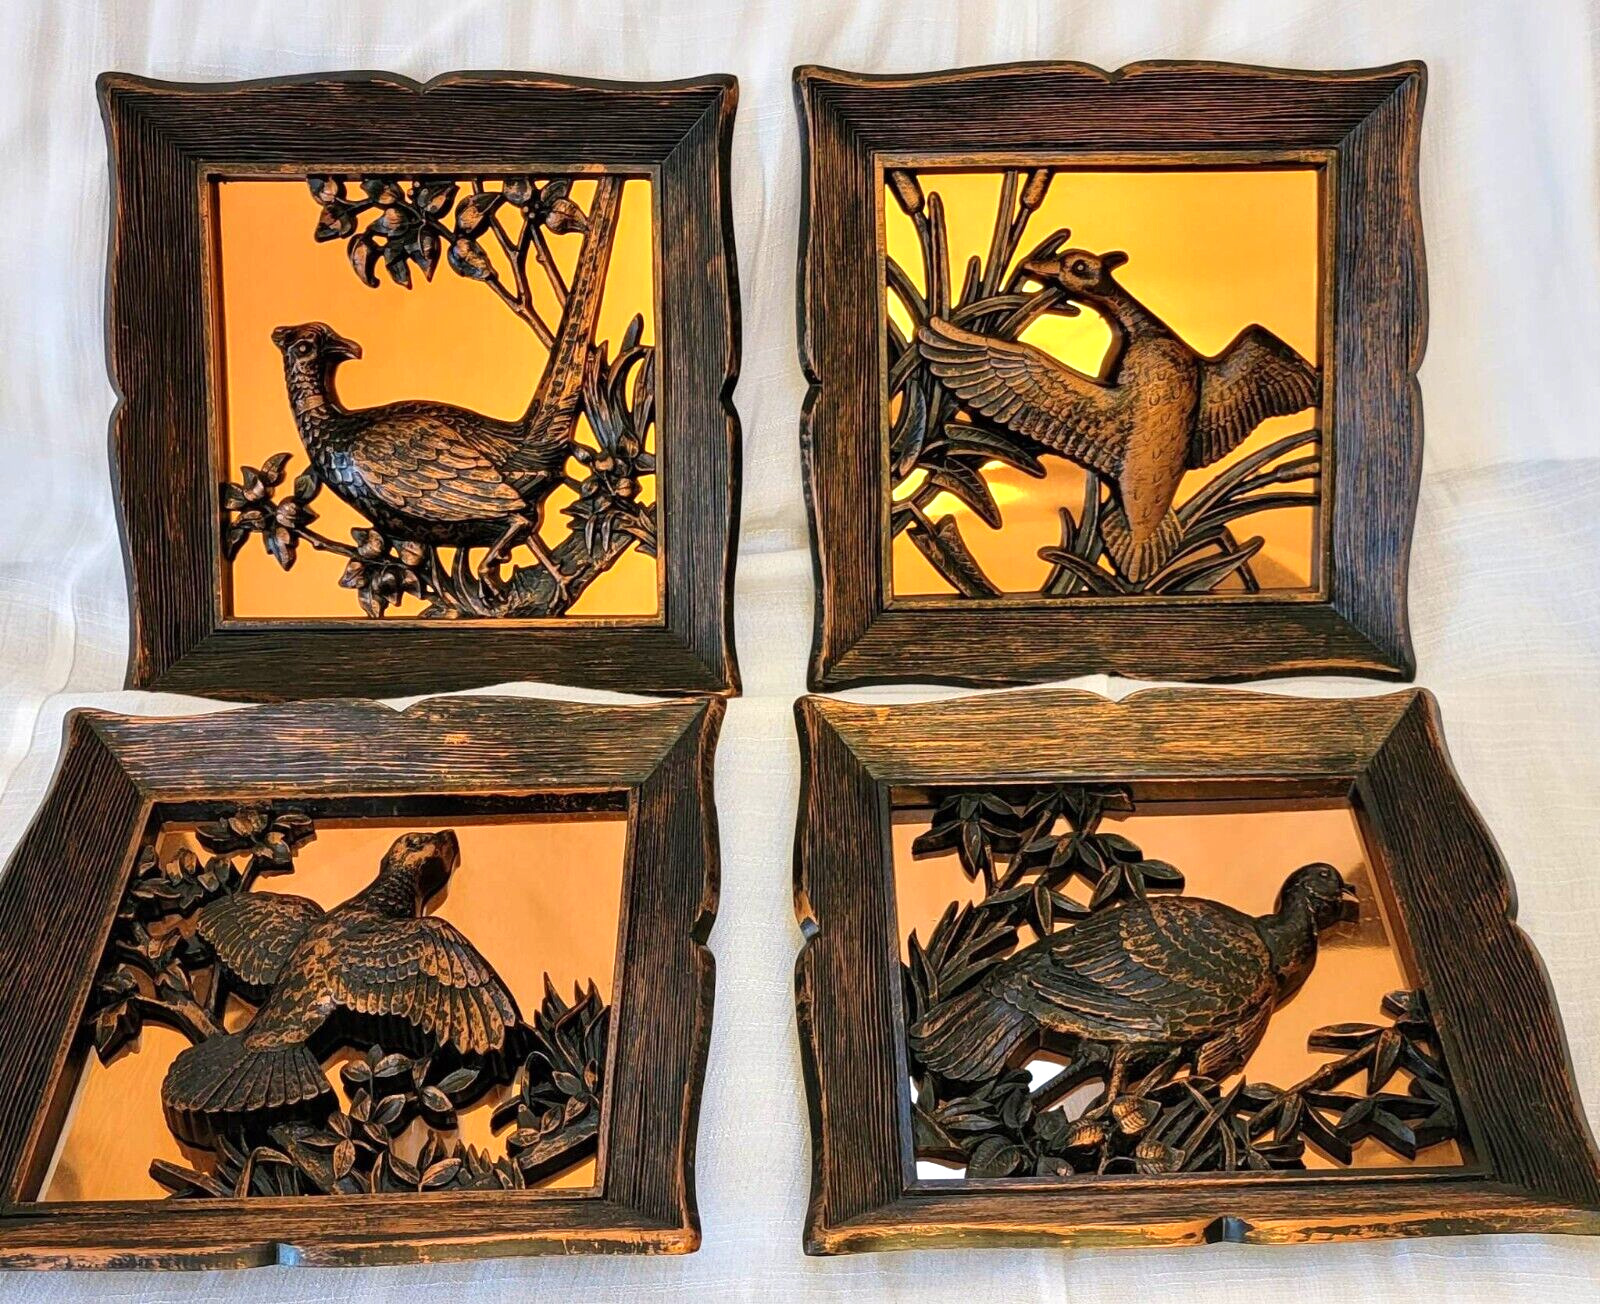 1963 Coppercraft Guild 3D Wall Art/Plaques Framed Set of 4 Vintage Collectable